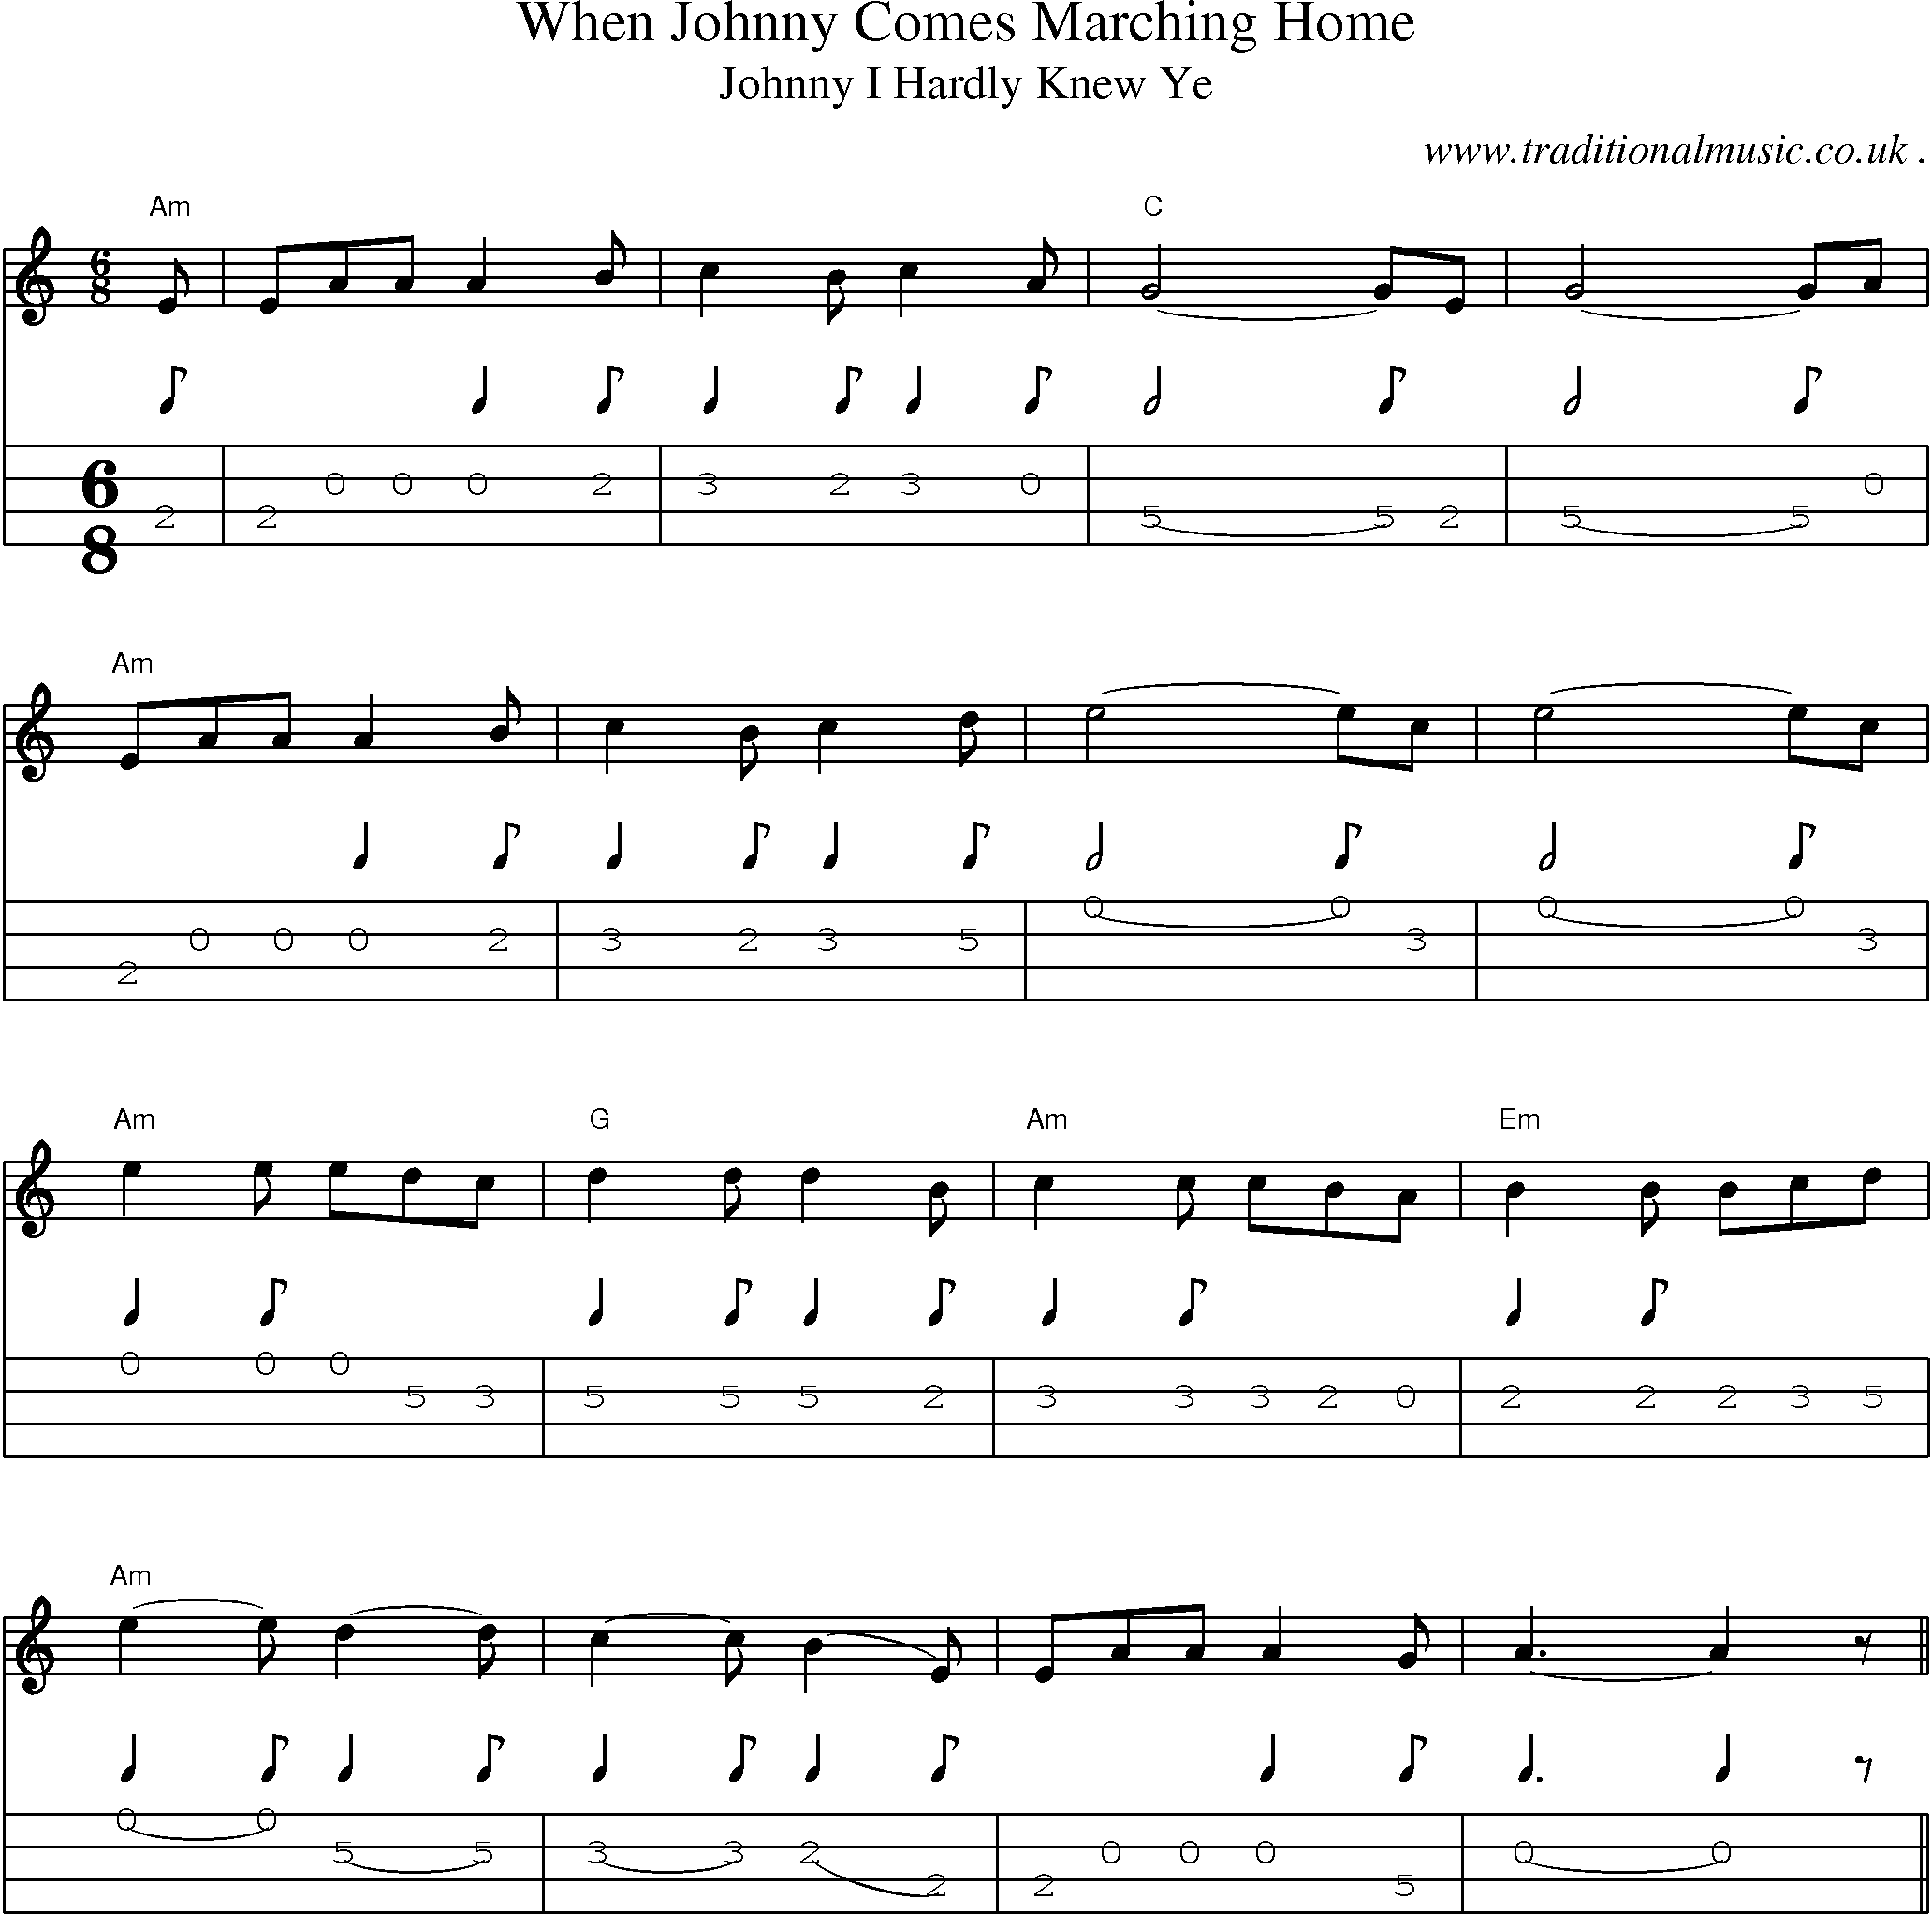 Music Score and Mandolin Tabs for When Johnny Comes Marching Home